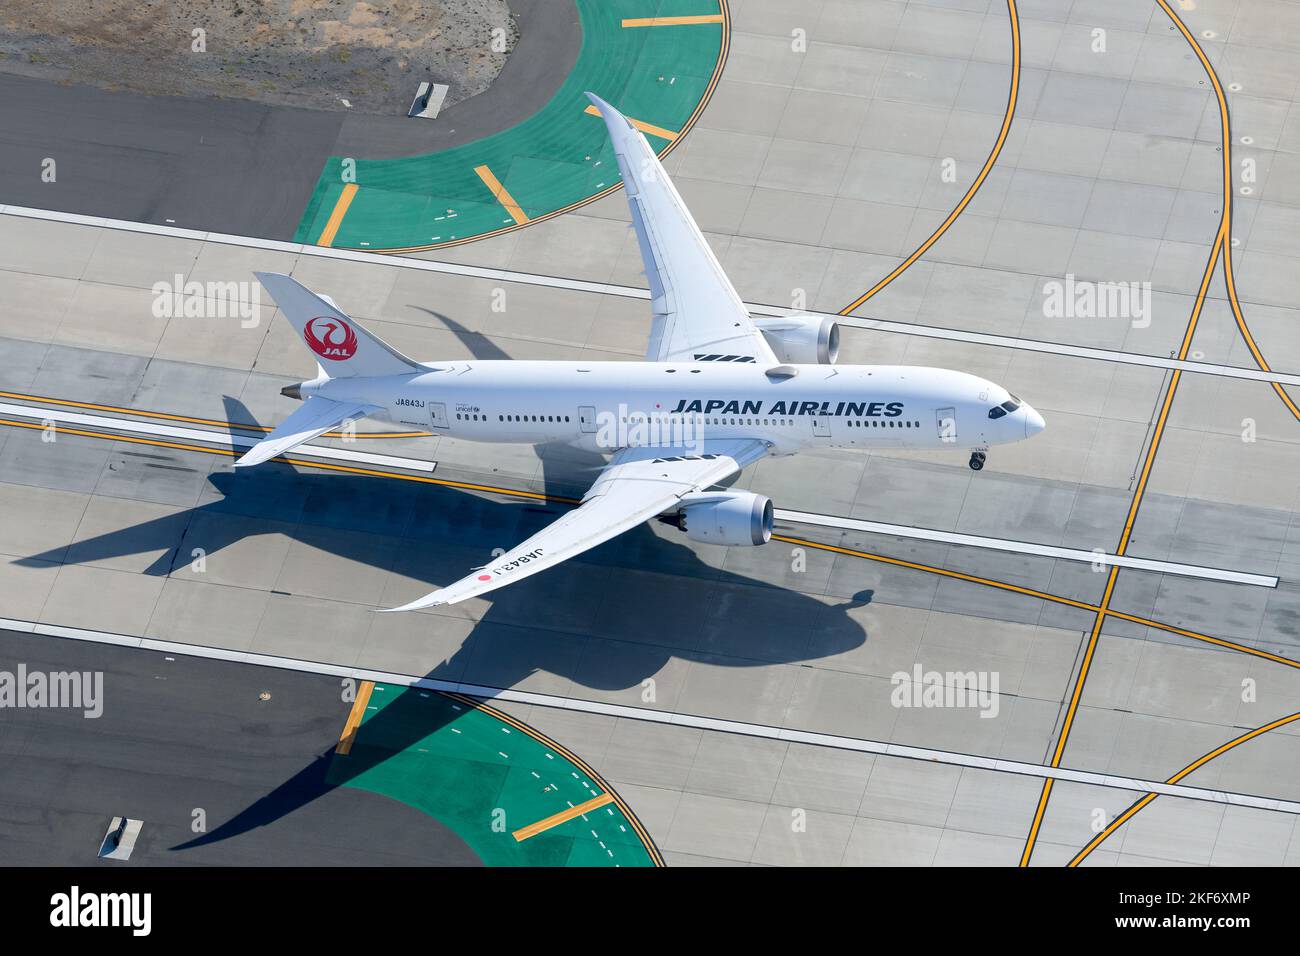 Japan Airlines Boeing 787-8 Dreamliner aircraft taking off with wing flex. Airplane B787 of JAL Airlines departing. Plane JA843J during take off. Stock Photo